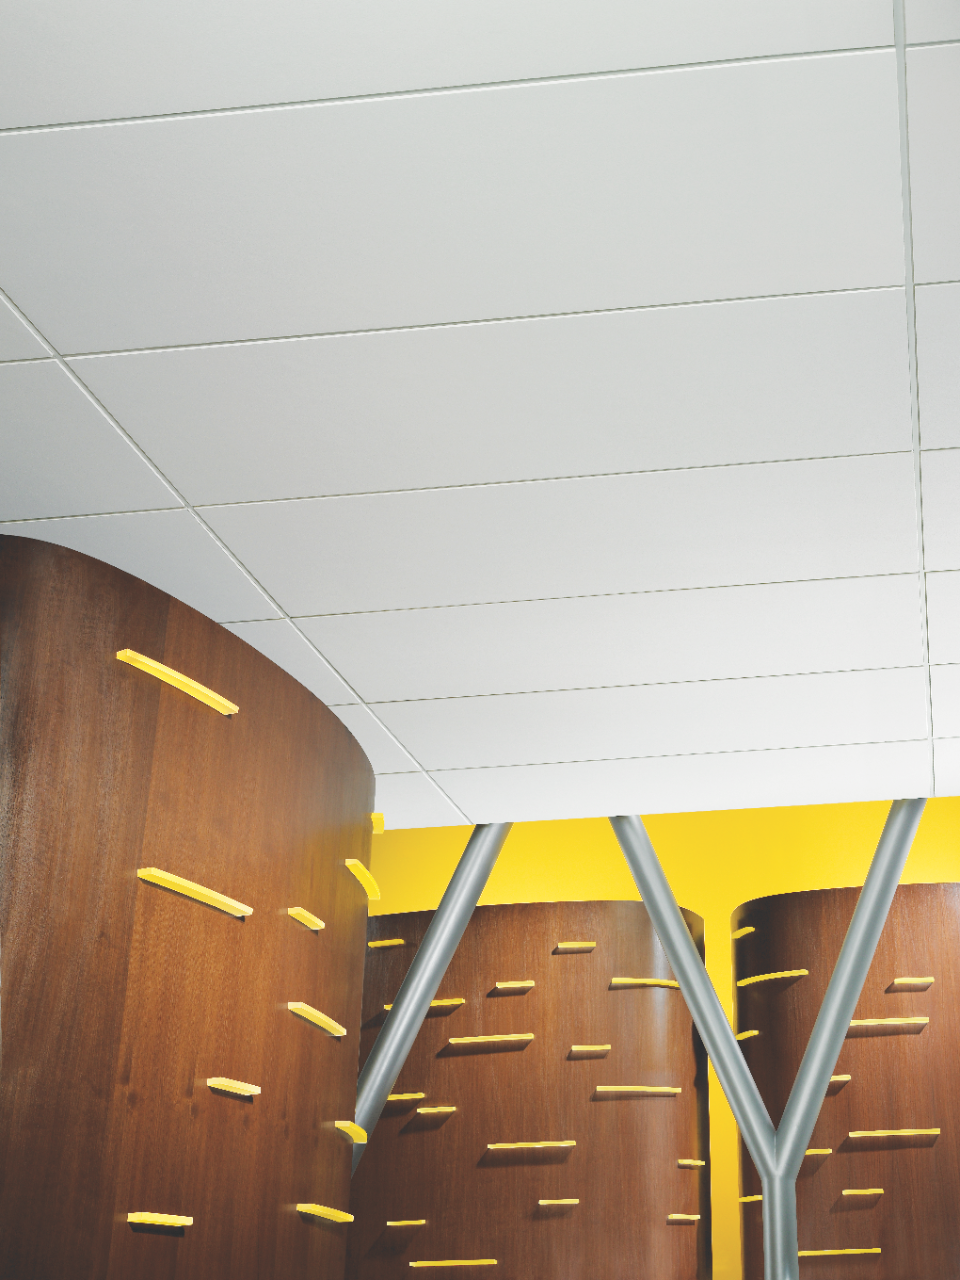 USG Halcyon™ Acoustical Ceiling Panels in an office settting